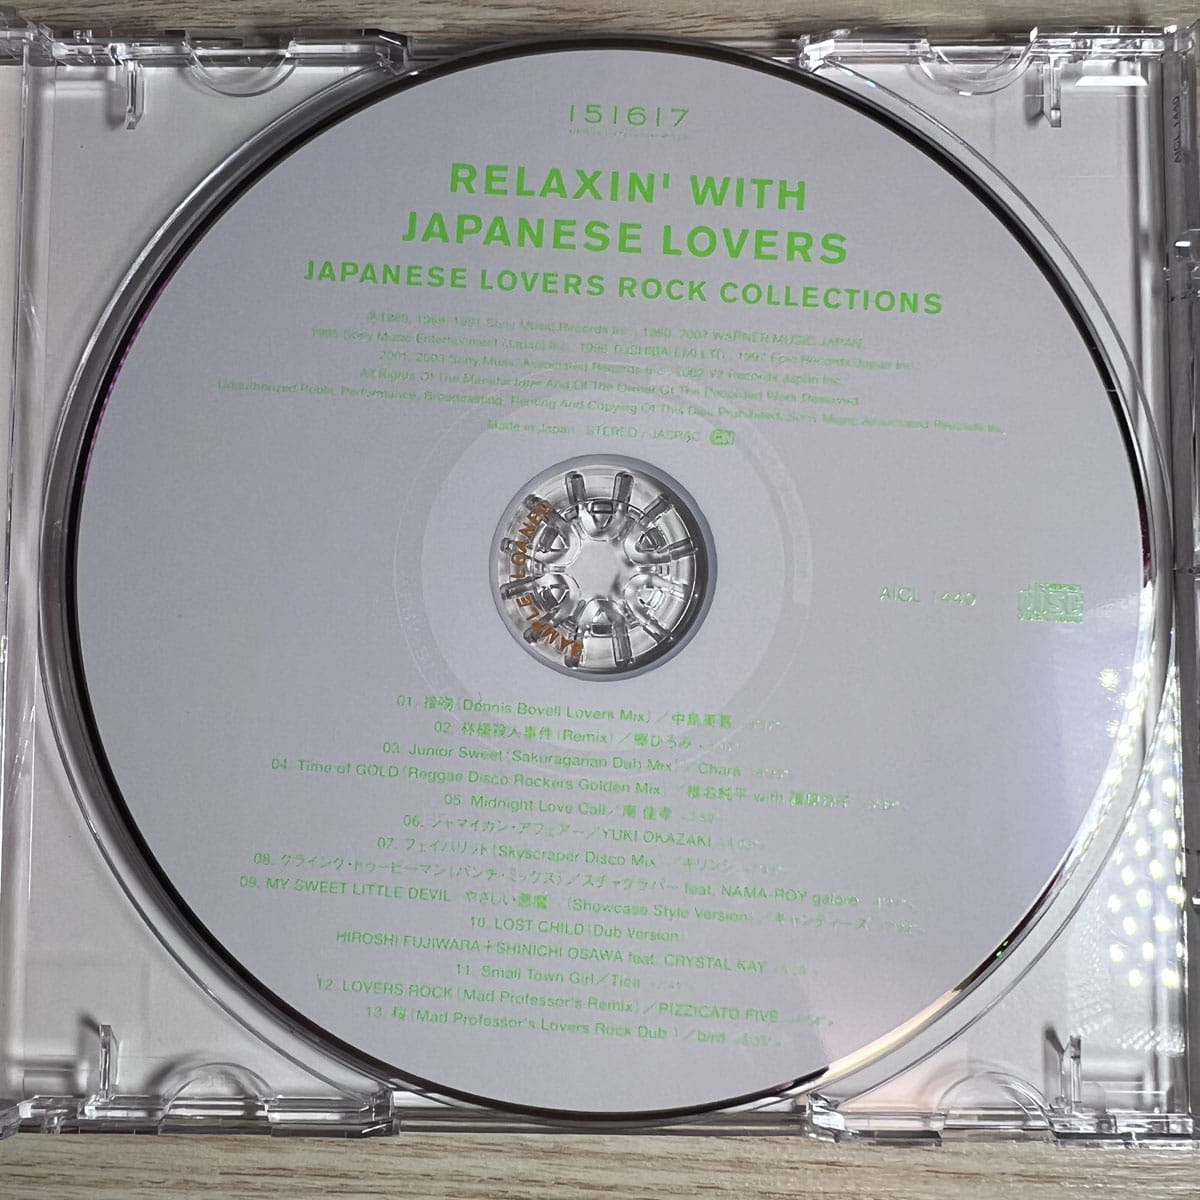 [CD] ORG/SAMPLE VA / RELAXIN' WITH JAPANESE LOVERS